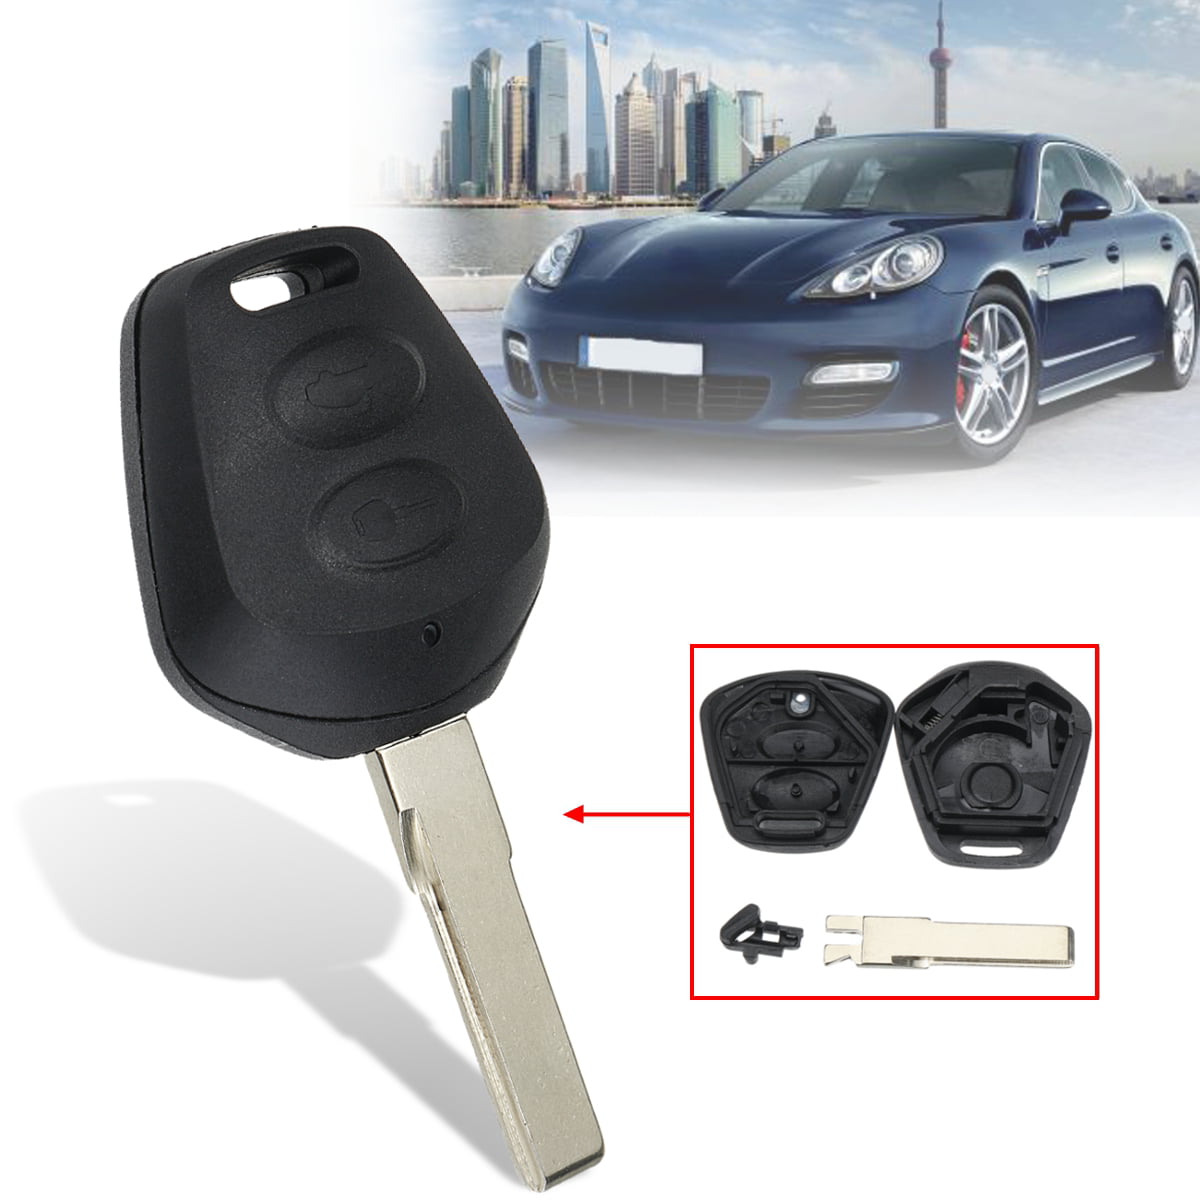 2 Button Remote Key Fob Case Shell Replacement For Porsche Boxster S 986 911 996 